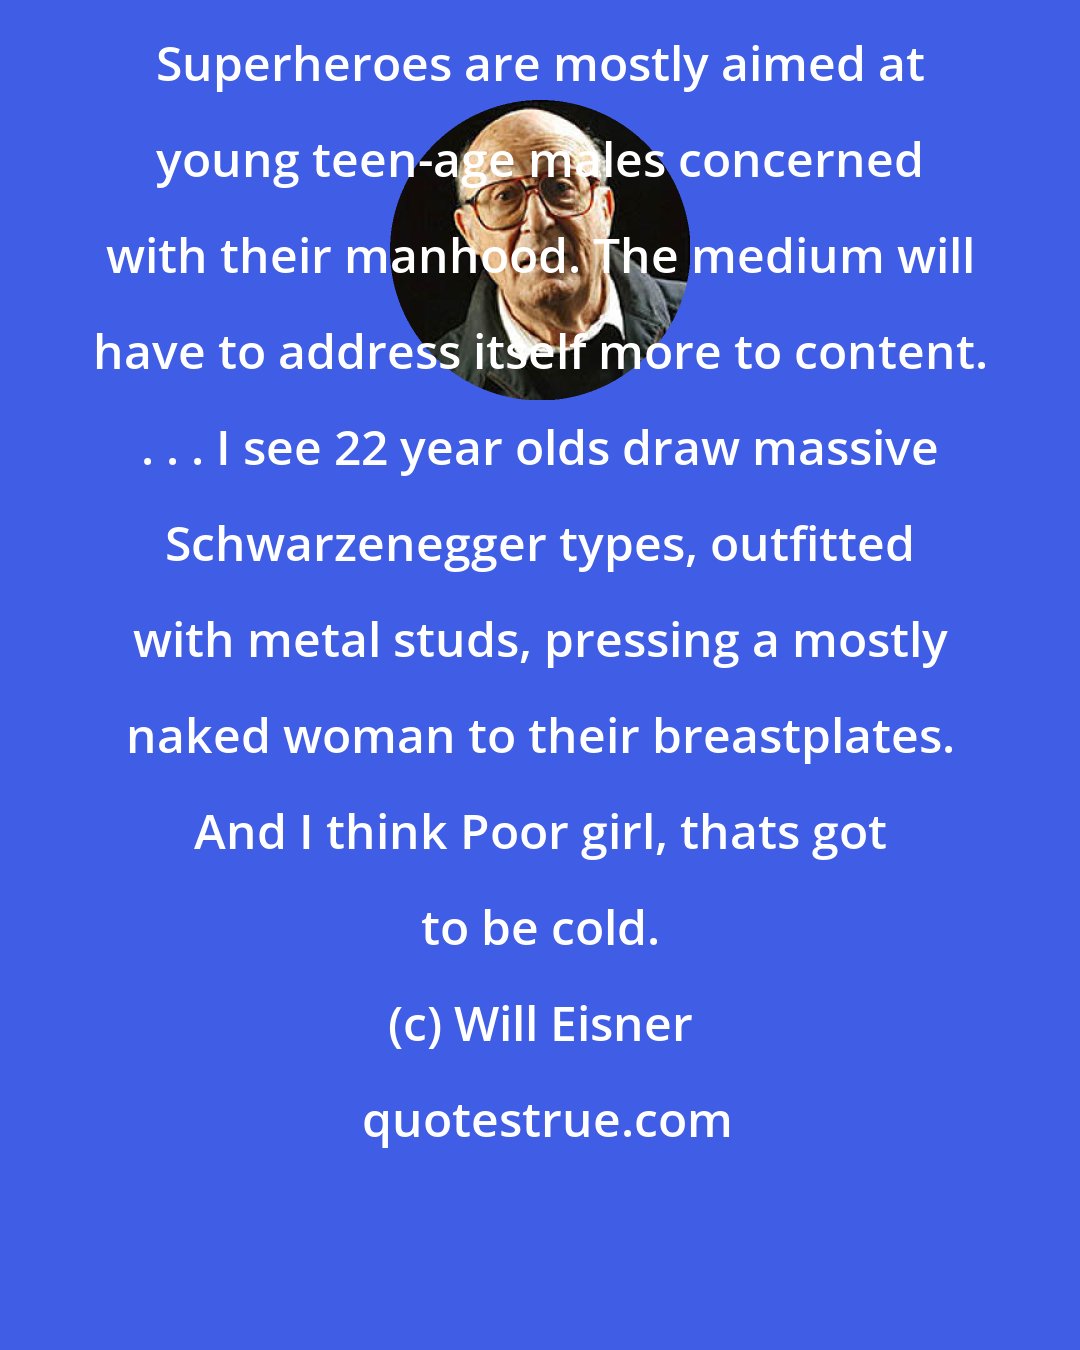 Will Eisner: Superheroes are mostly aimed at young teen-age males concerned with their manhood. The medium will have to address itself more to content. . . . I see 22 year olds draw massive Schwarzenegger types, outfitted with metal studs, pressing a mostly naked woman to their breastplates. And I think Poor girl, thats got to be cold.